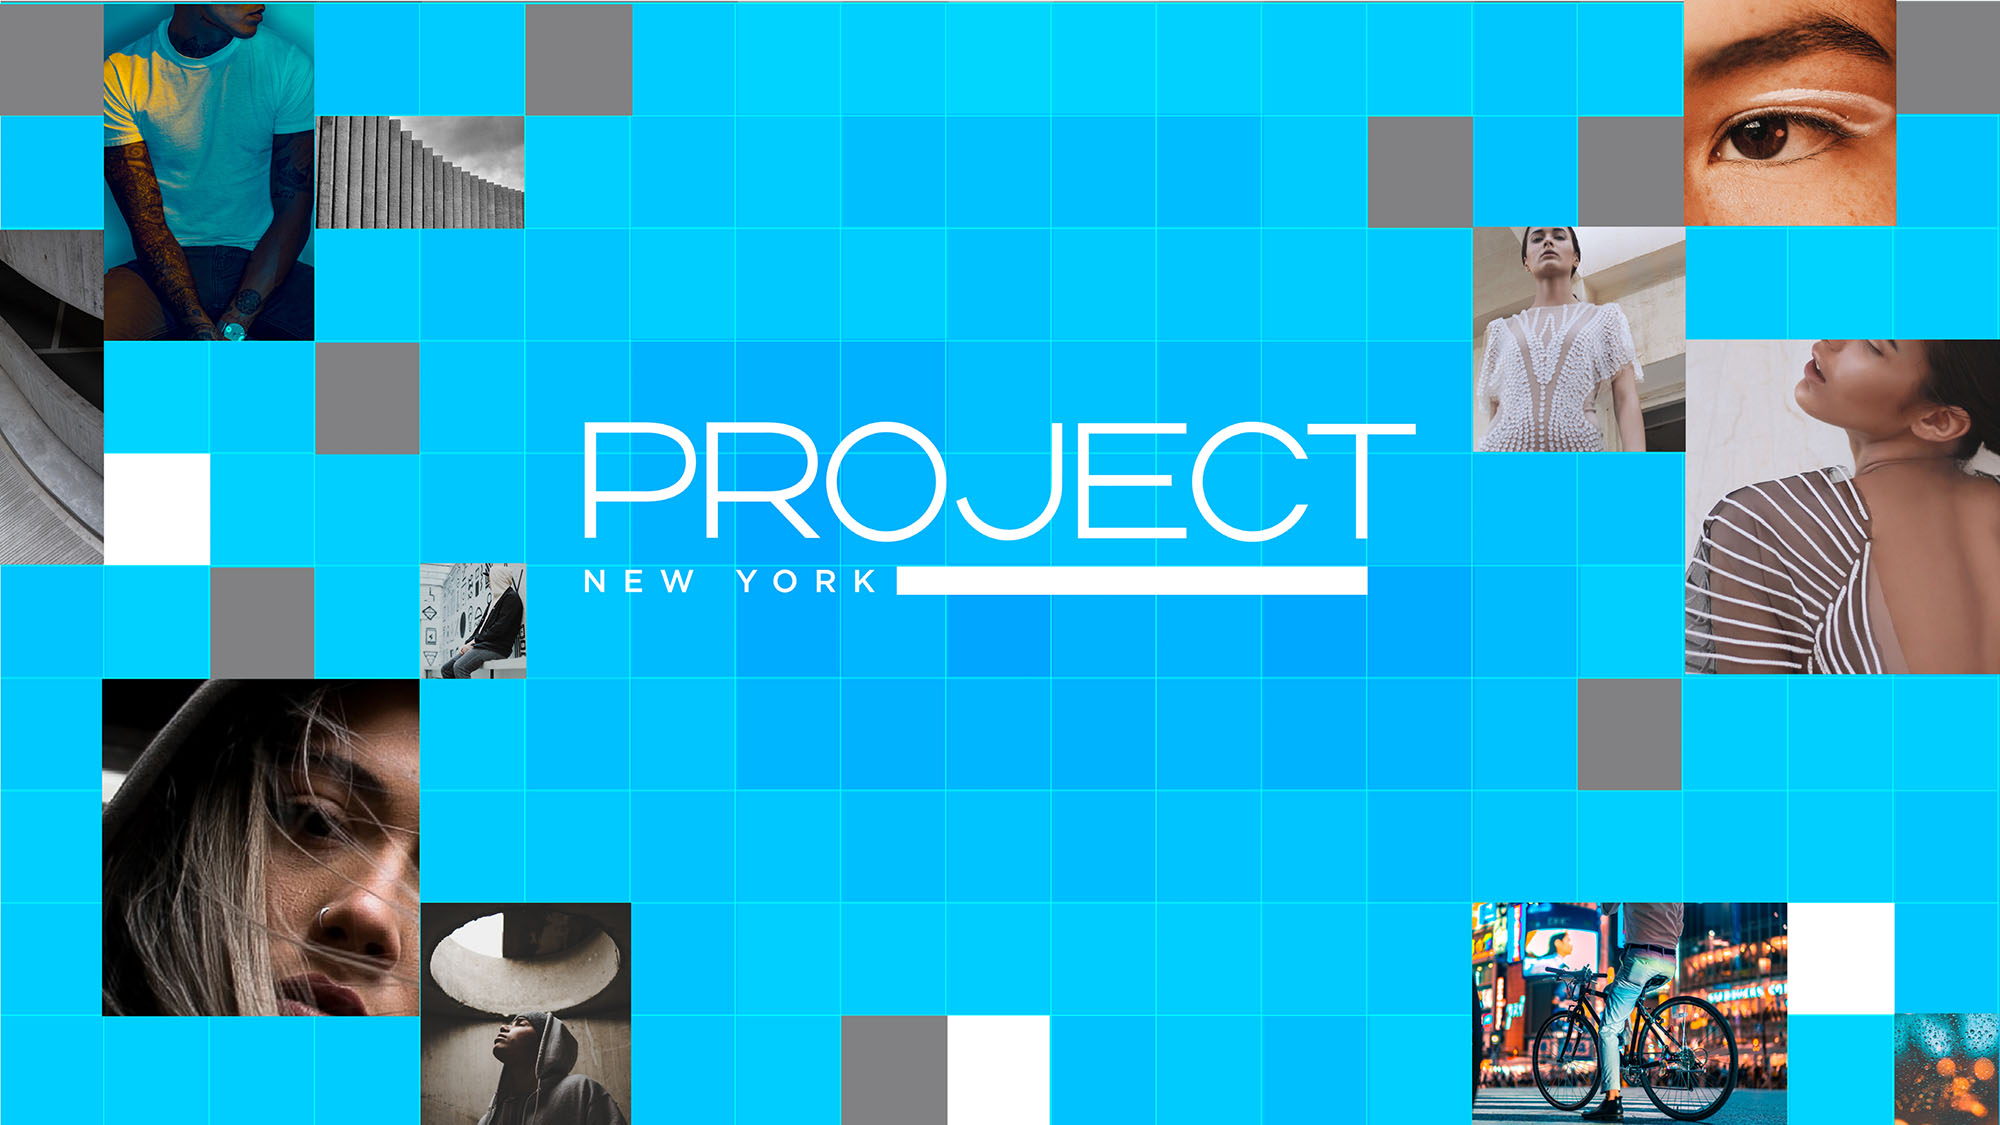 PROJECT NEW YORK CAMPAIGN ART 1